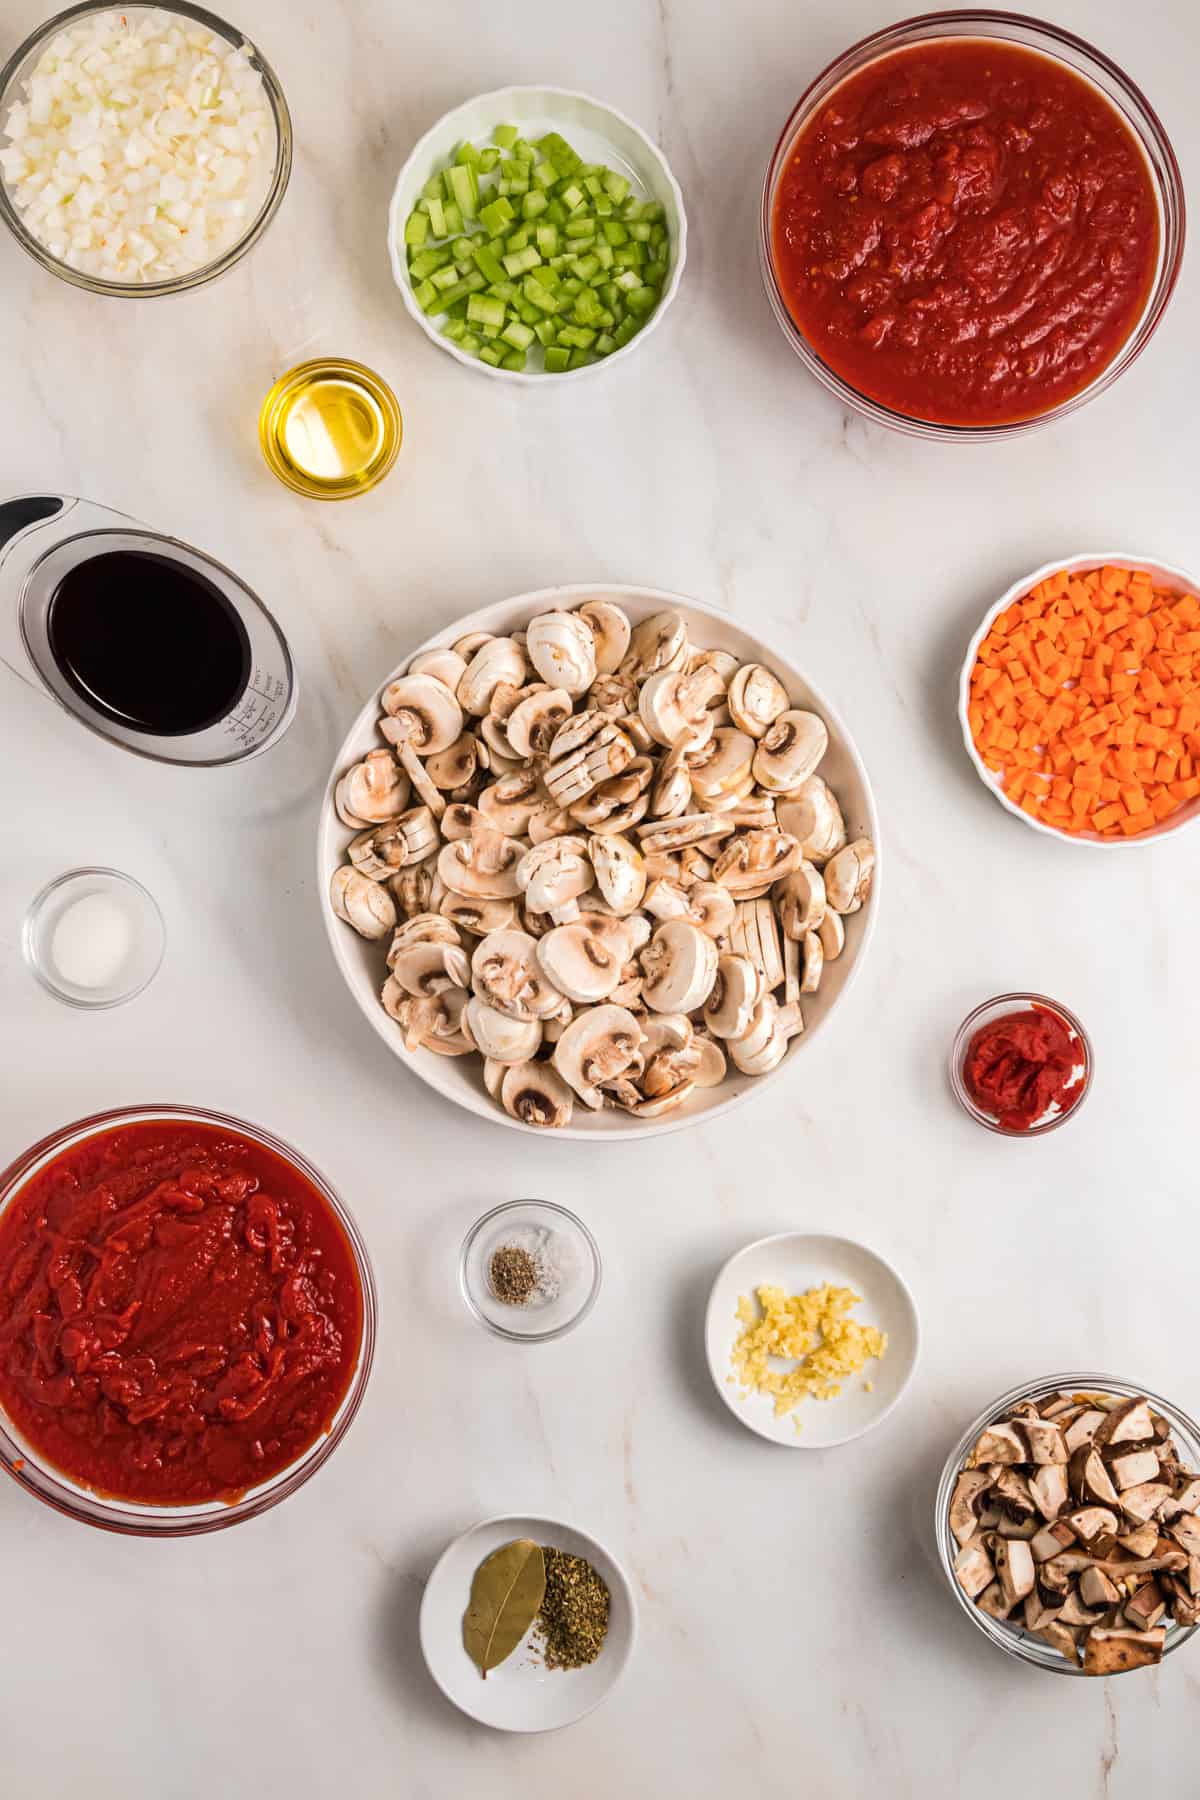 The ingredients for mushroom bolognese are spread out on a white surface.